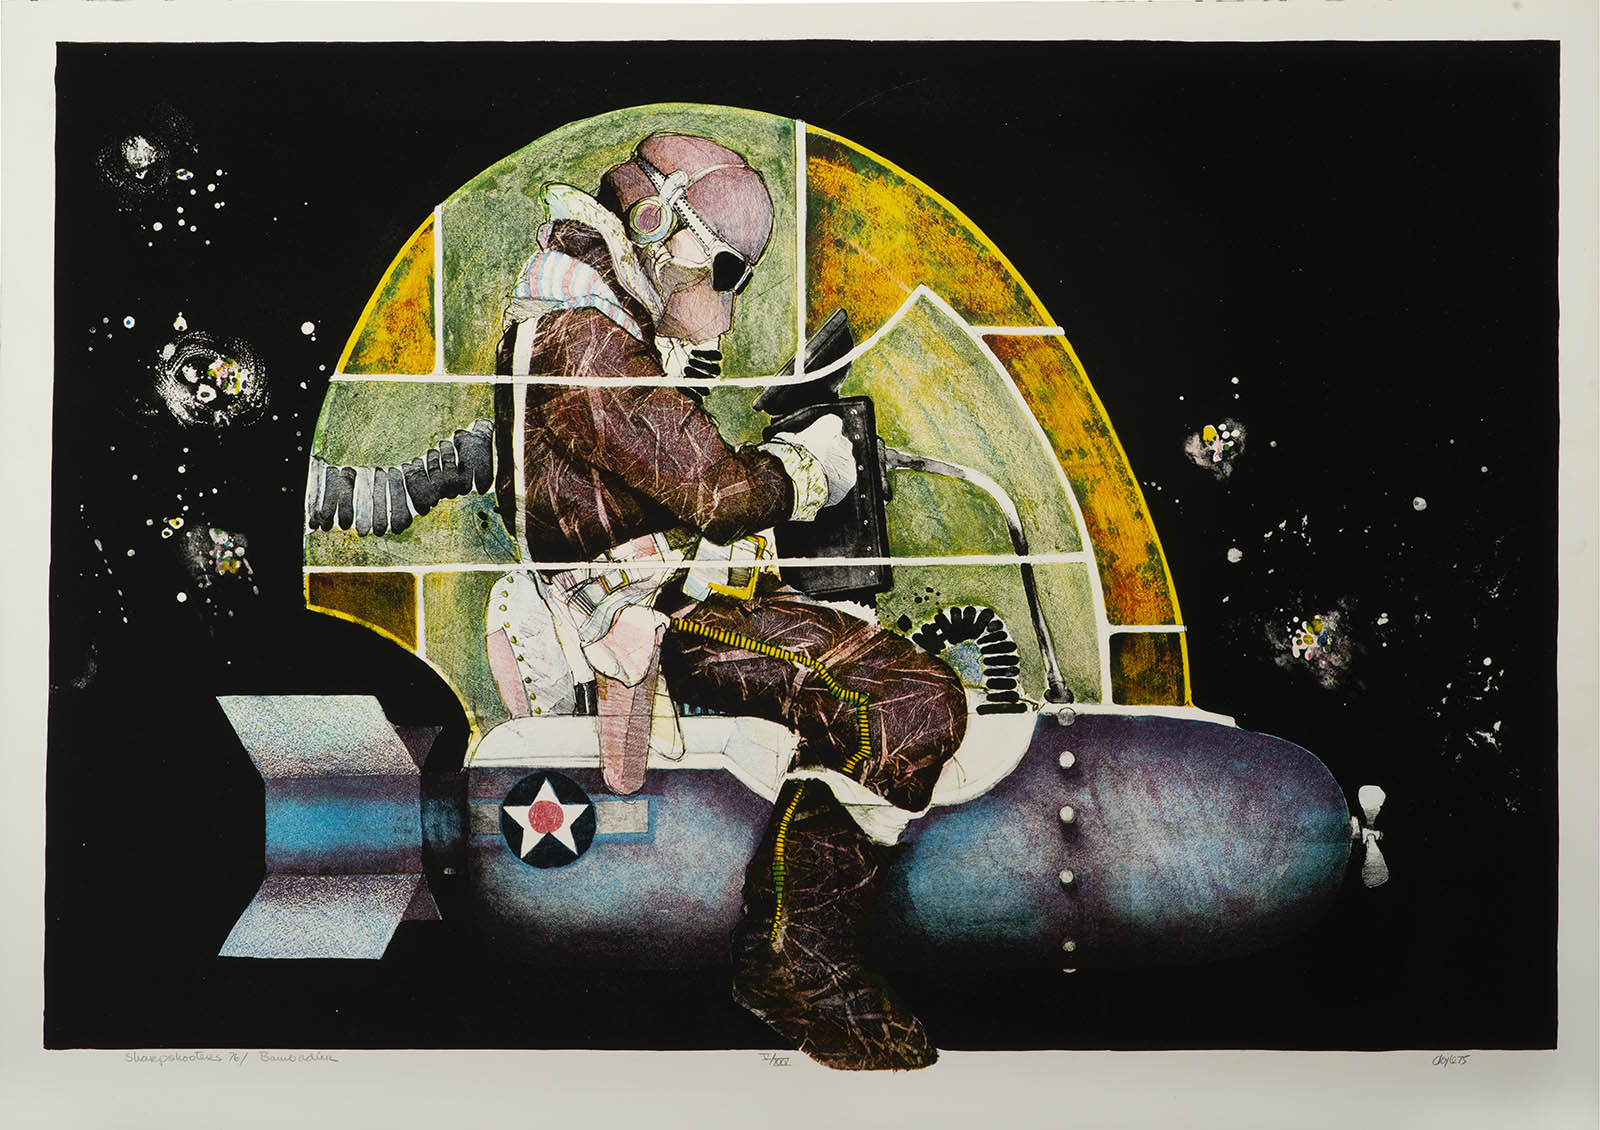 John L. Doyle, Bombardier  (from the series: Sharpshooters 76), 1976